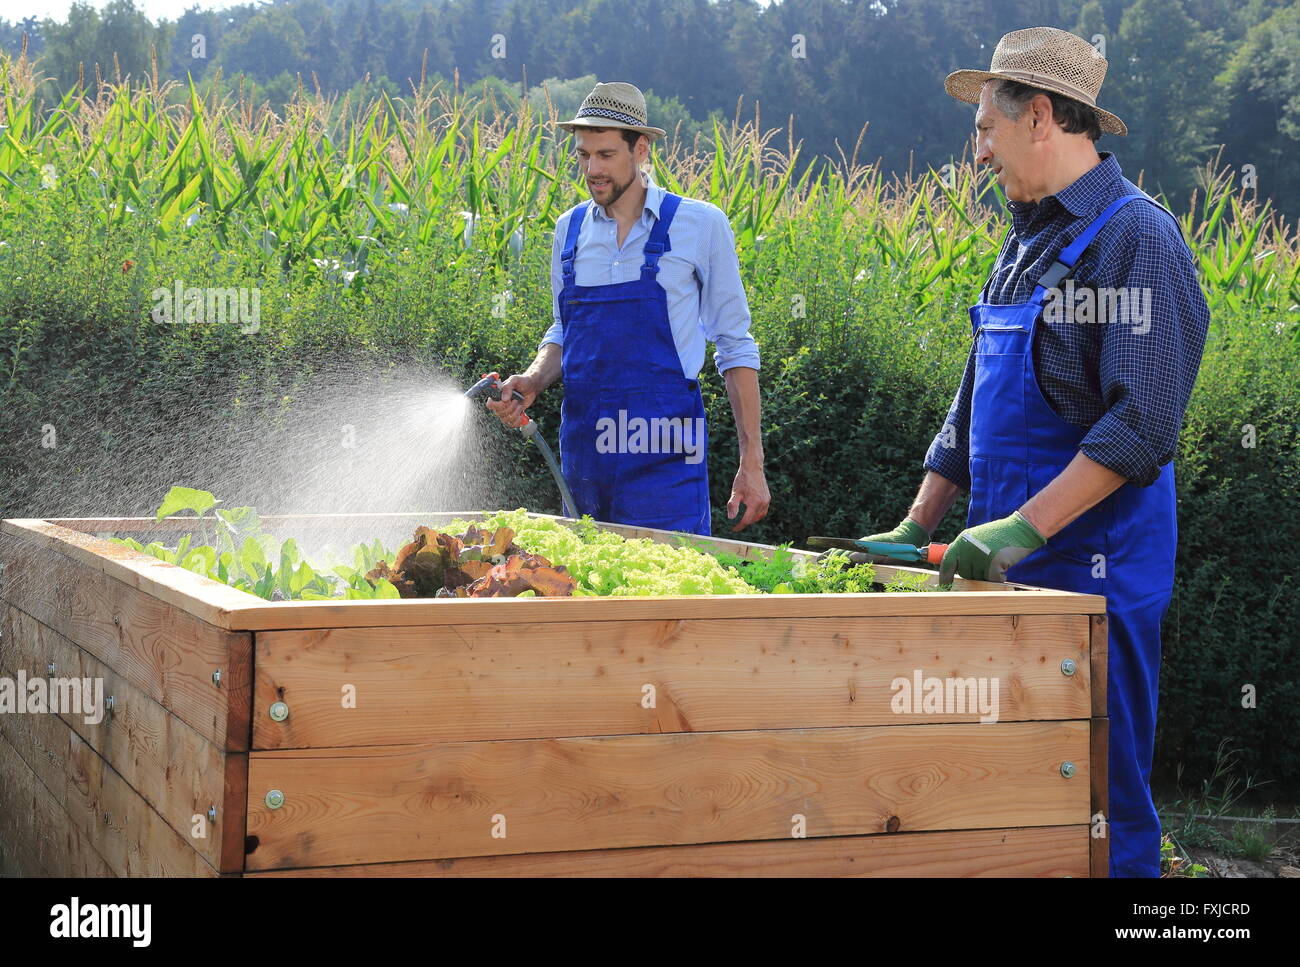 Two gardeners pouring a raised salad bed in garden Stock Photo